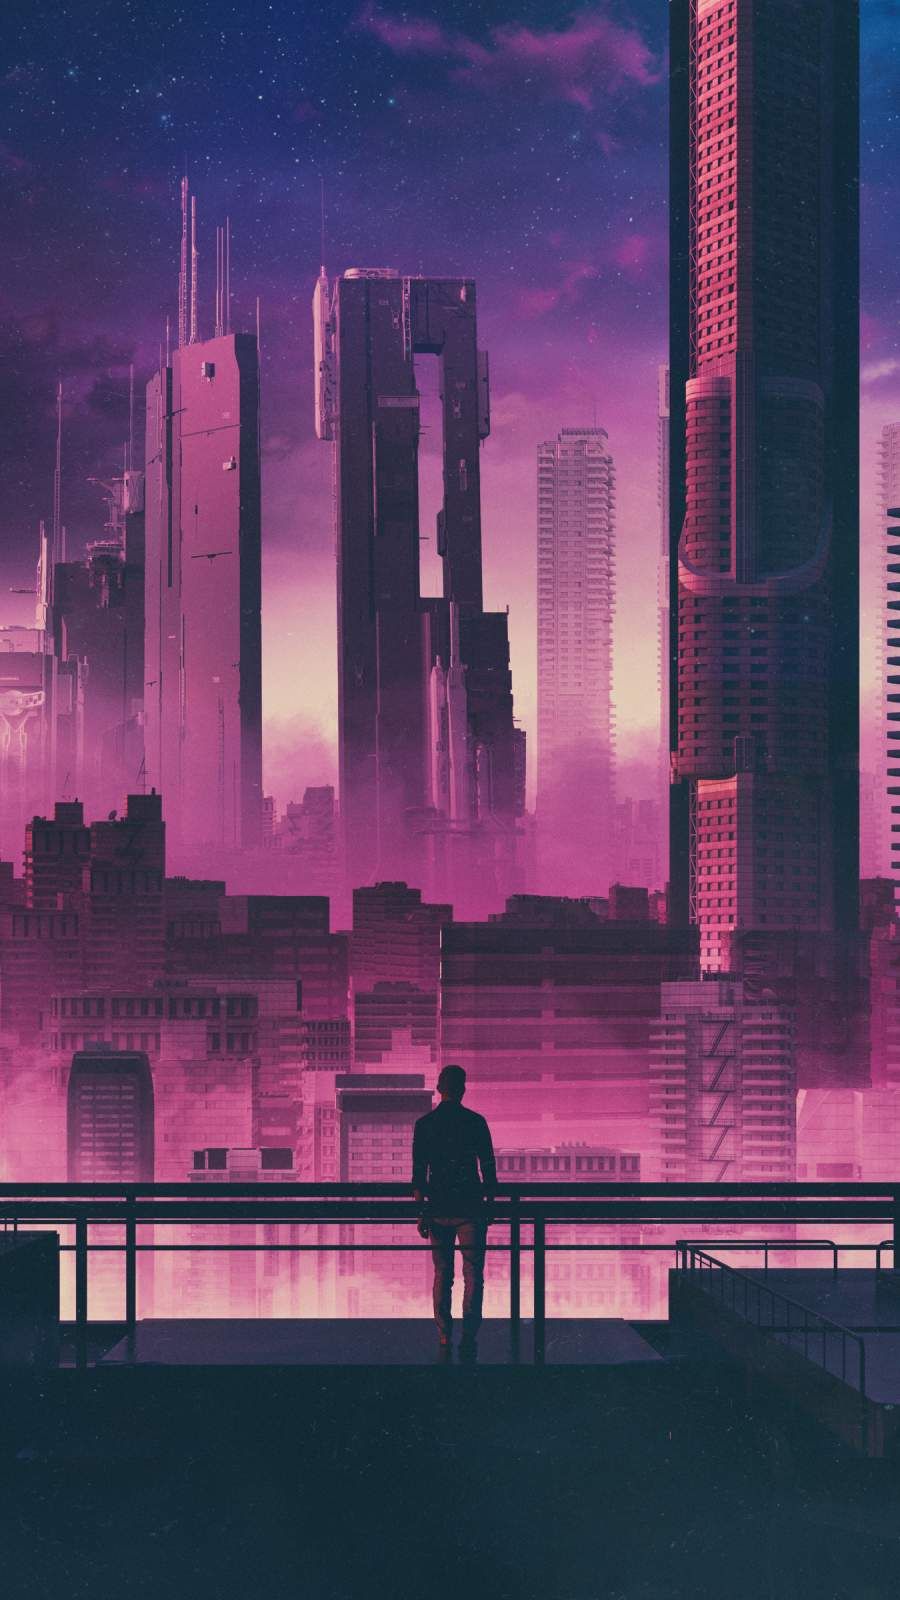 Future City and Man iPhone Wallpaper. City painting, Abstract city, City art